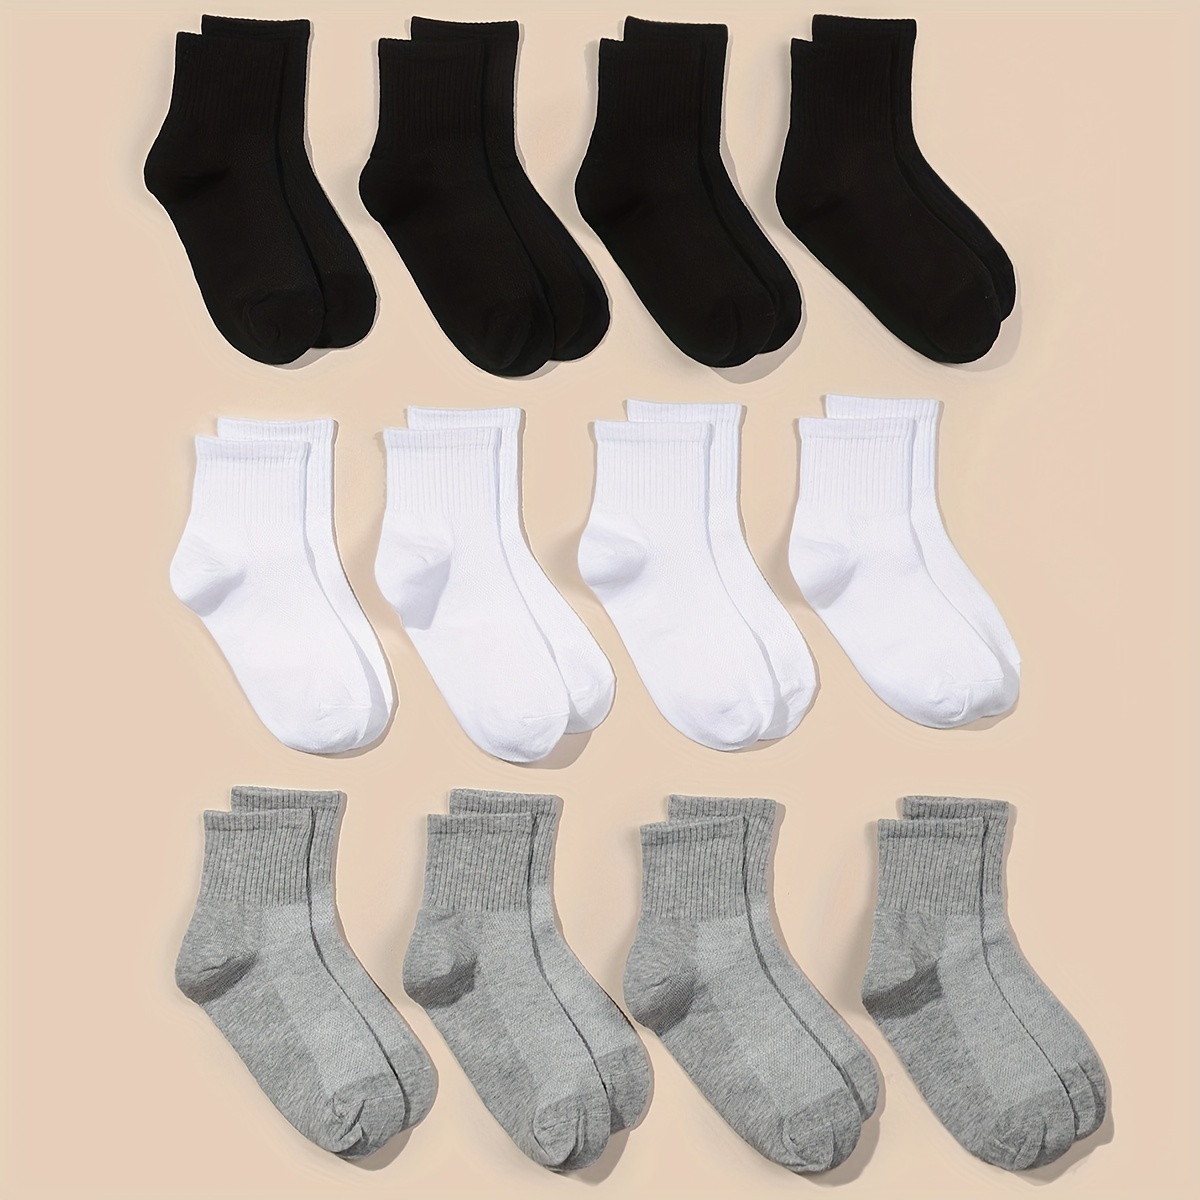 12pairs Boys Girls Casual Plain Color Crew Socks, Breathable Soft Comfy  Crew Socks, Children's Socks For Daily Wear